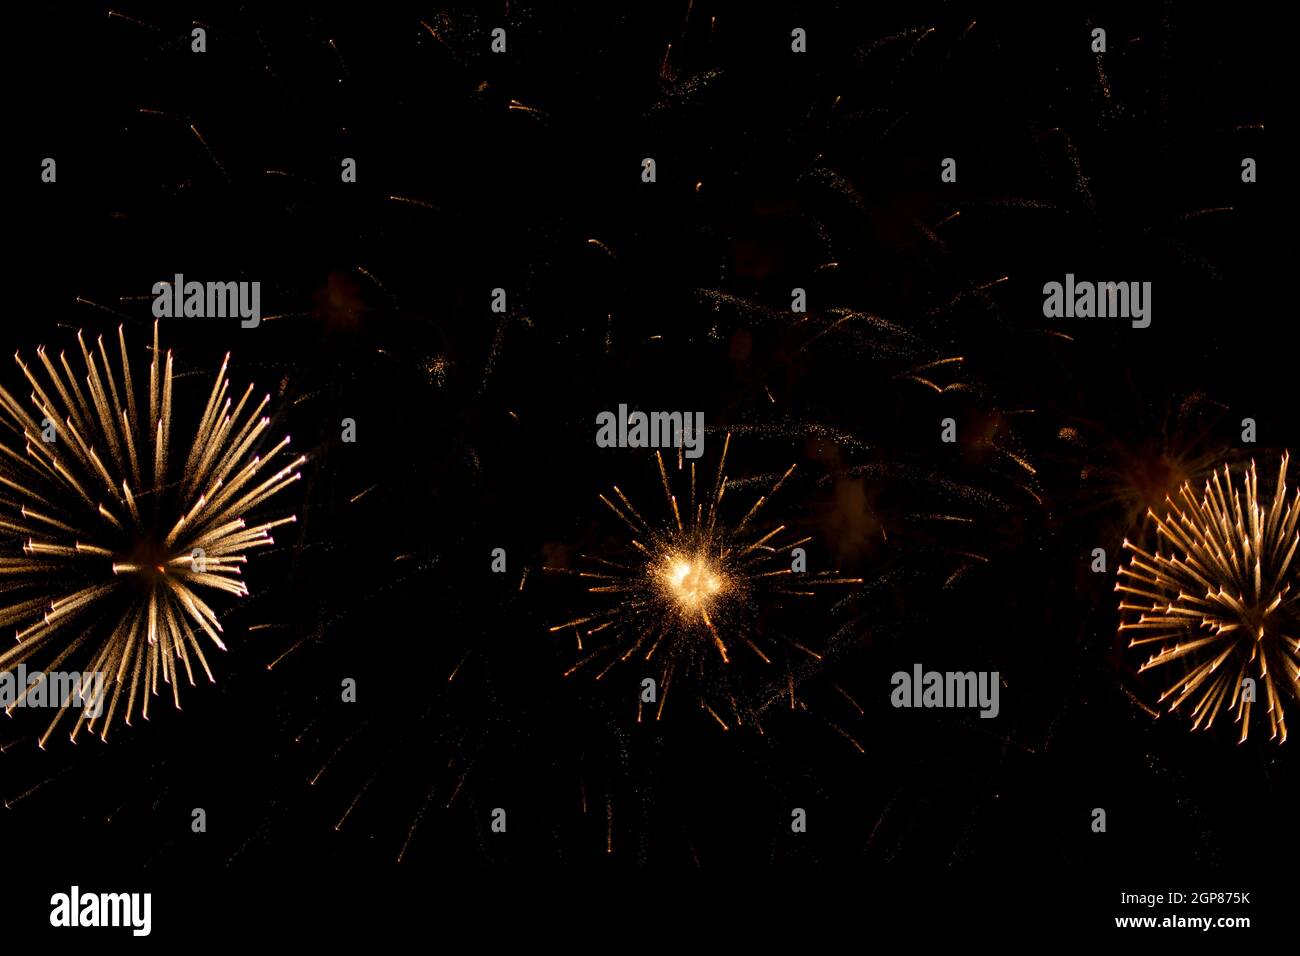 Salute in the sky. Explosion of fireworks in the night sky. Firecrackers flapping sparks in a dark space. Festive fireworks. Background with sparks fr Stock Photo